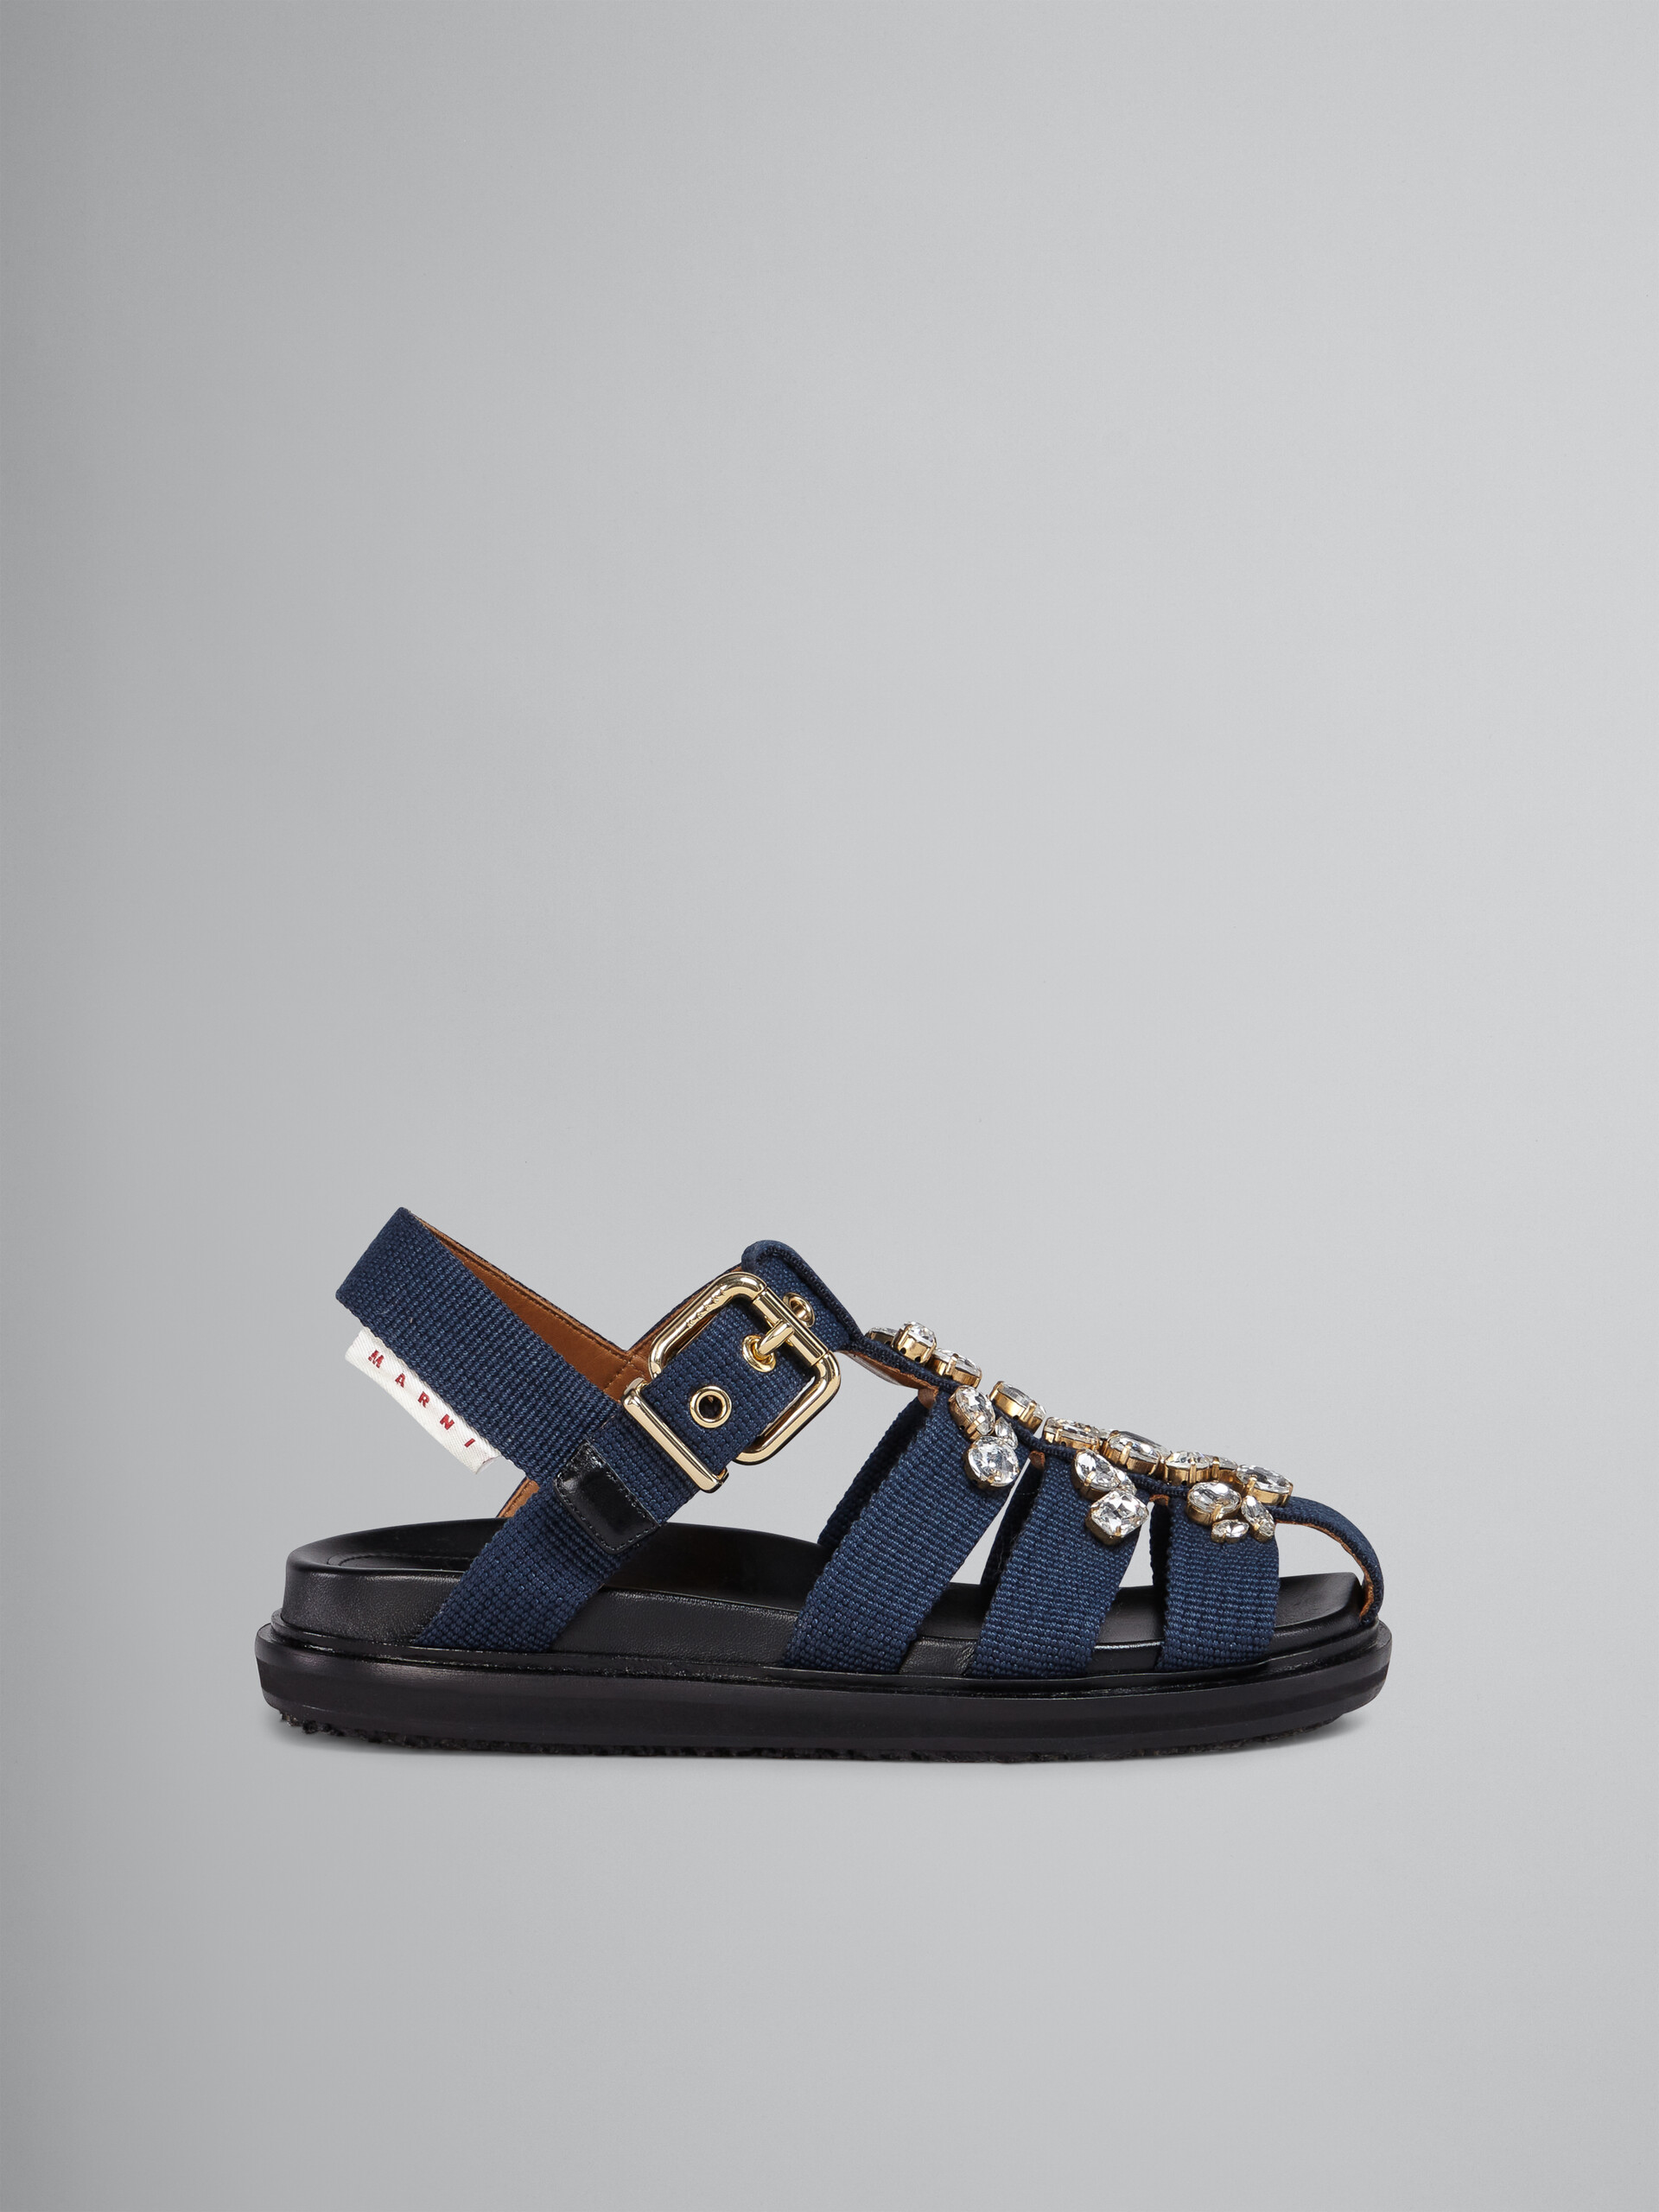 Blue ribbon Fussbett sandal with glass beads - Sandals - Image 1